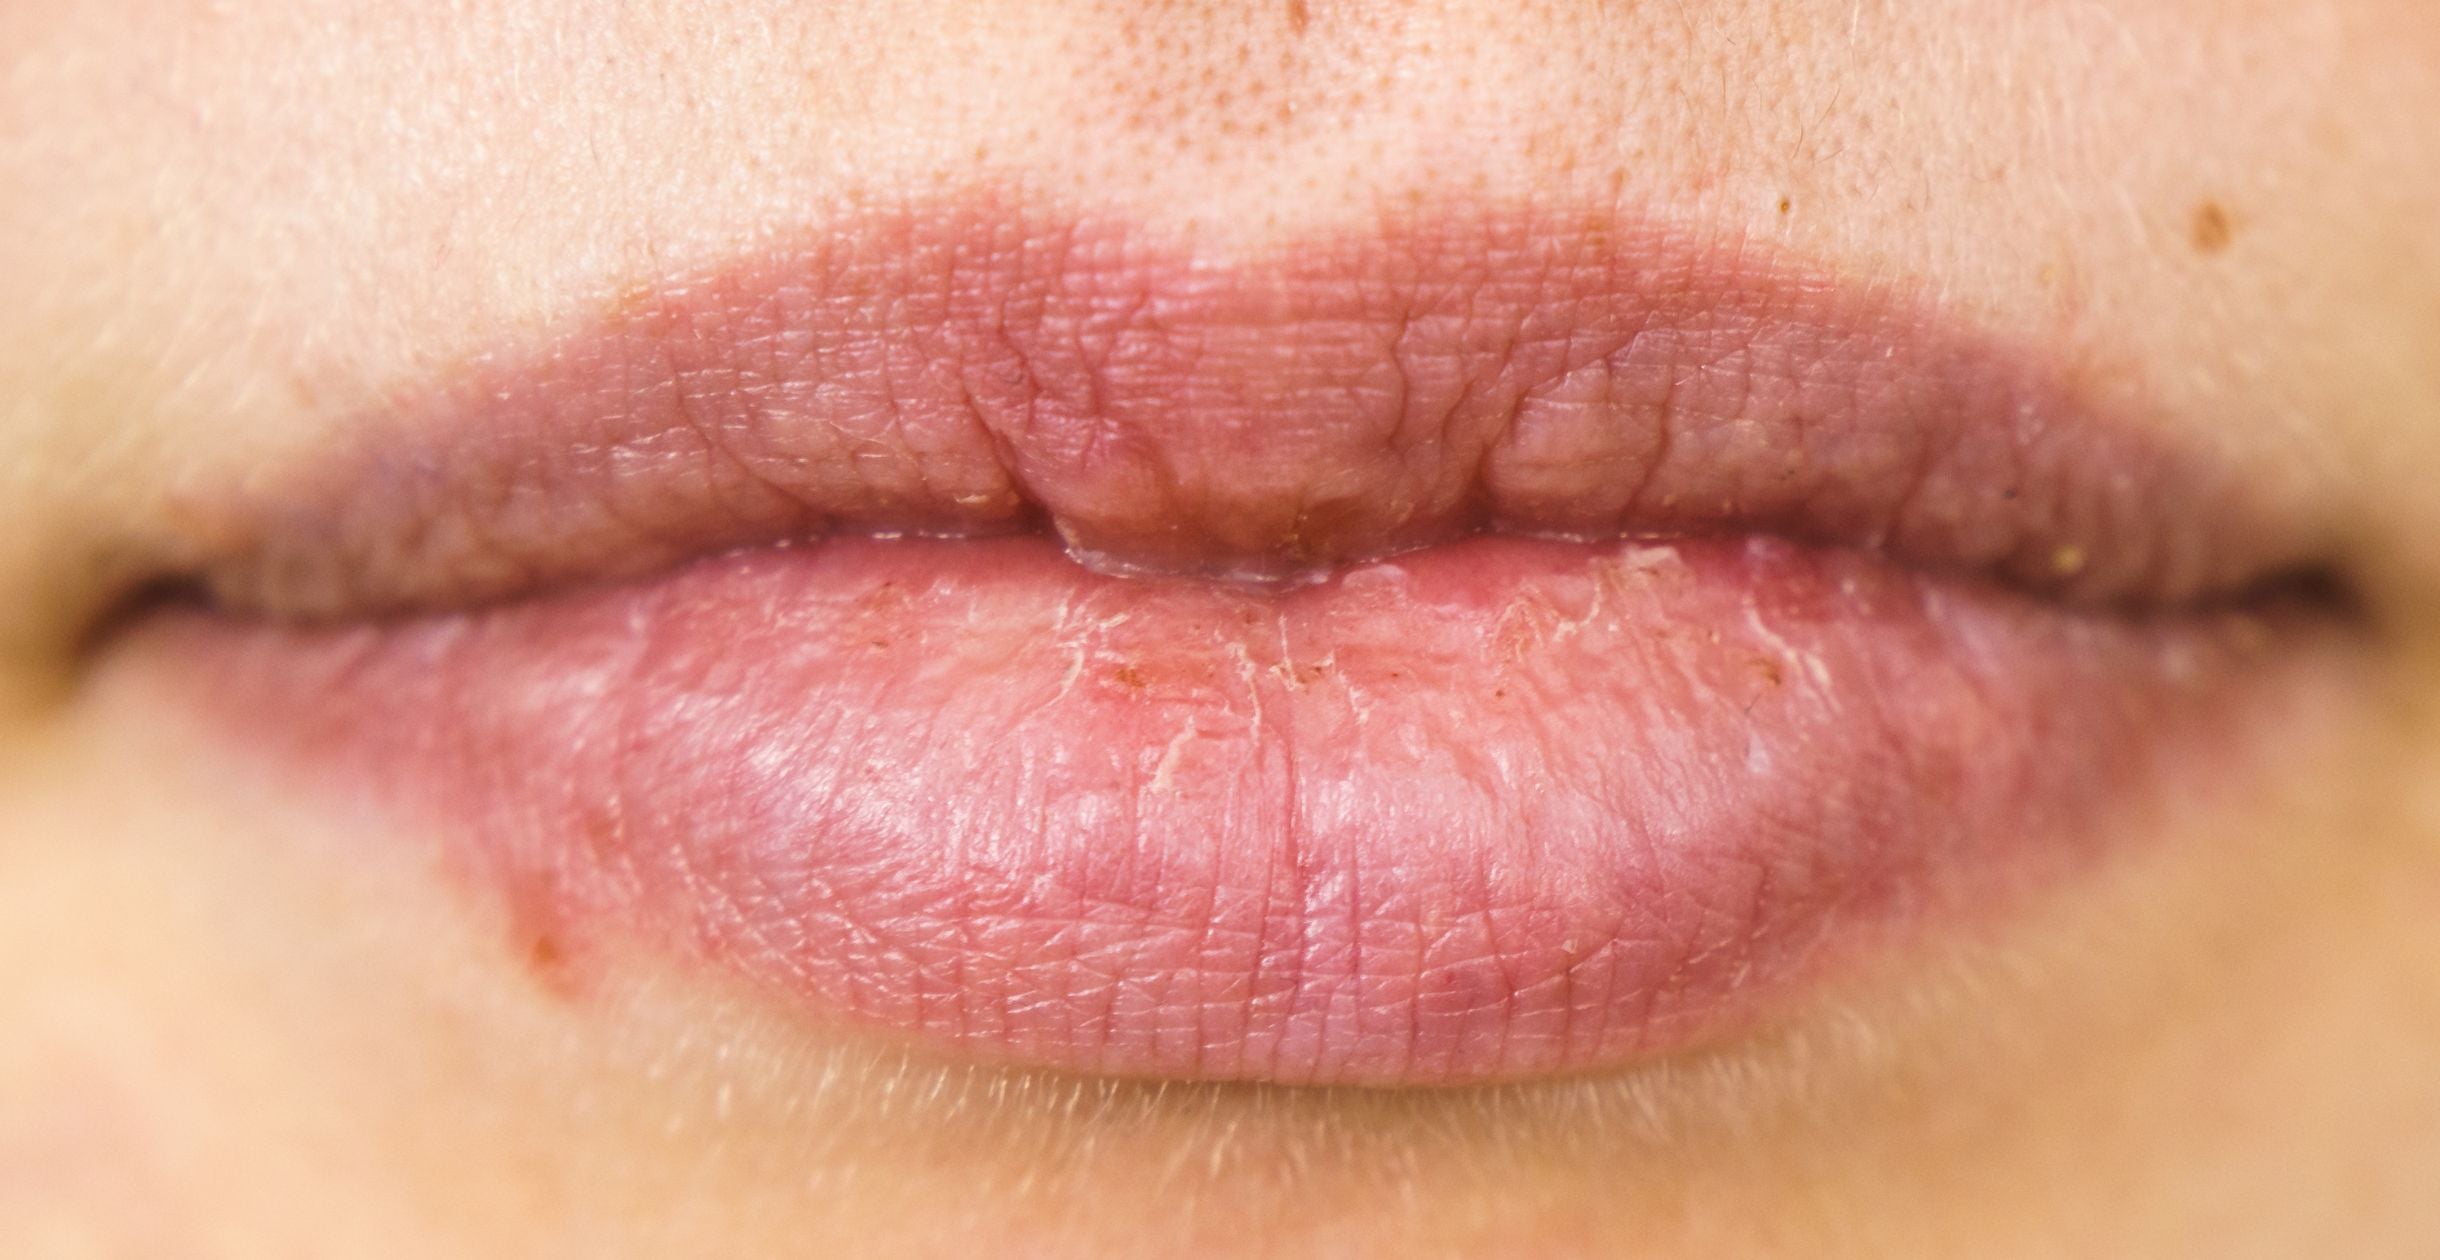 How to Get Rid of Pimple on Lip: Tips and Tricks